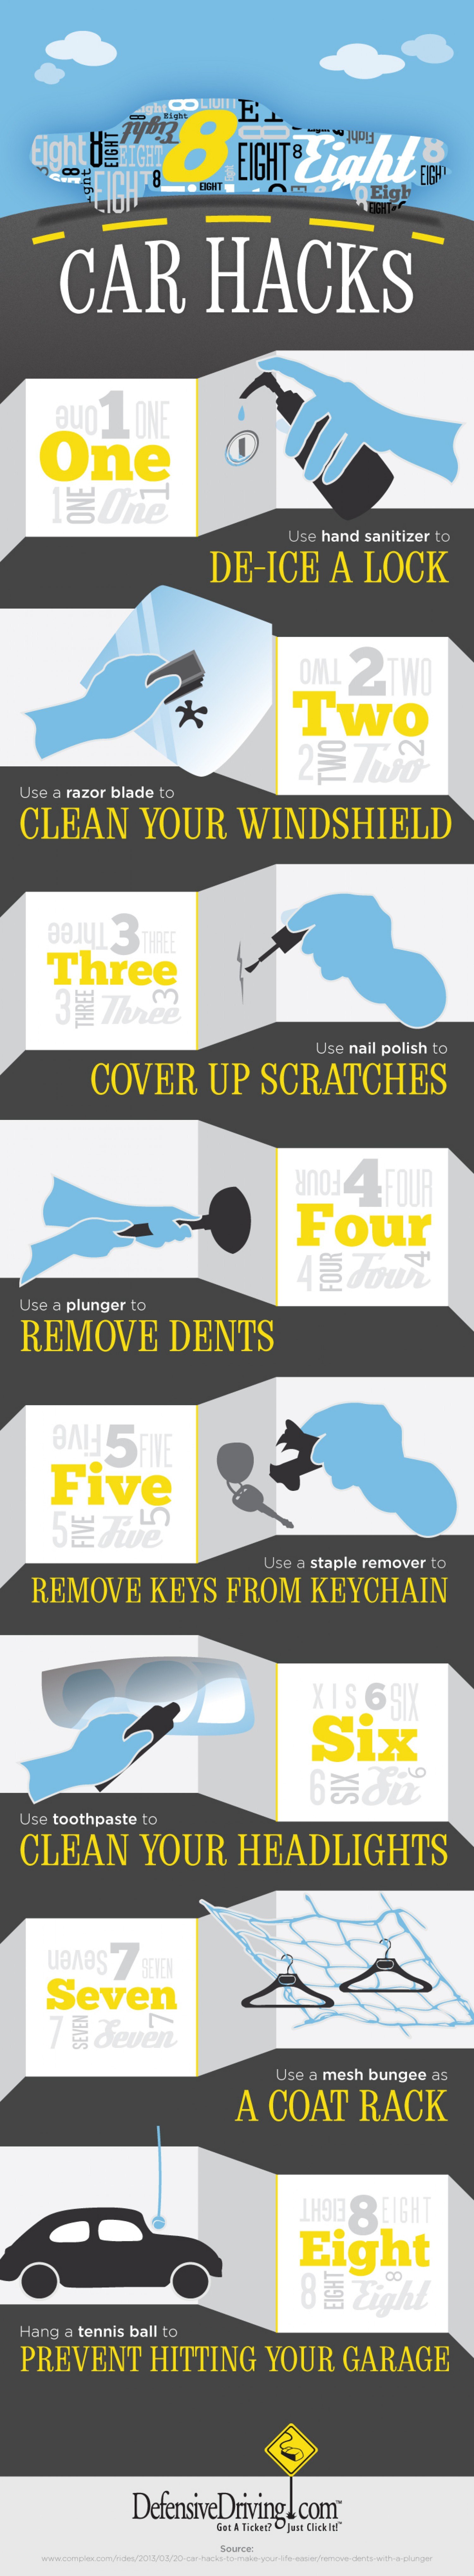 8 Car Hacks That Are Sure to Come in Handy Infographic